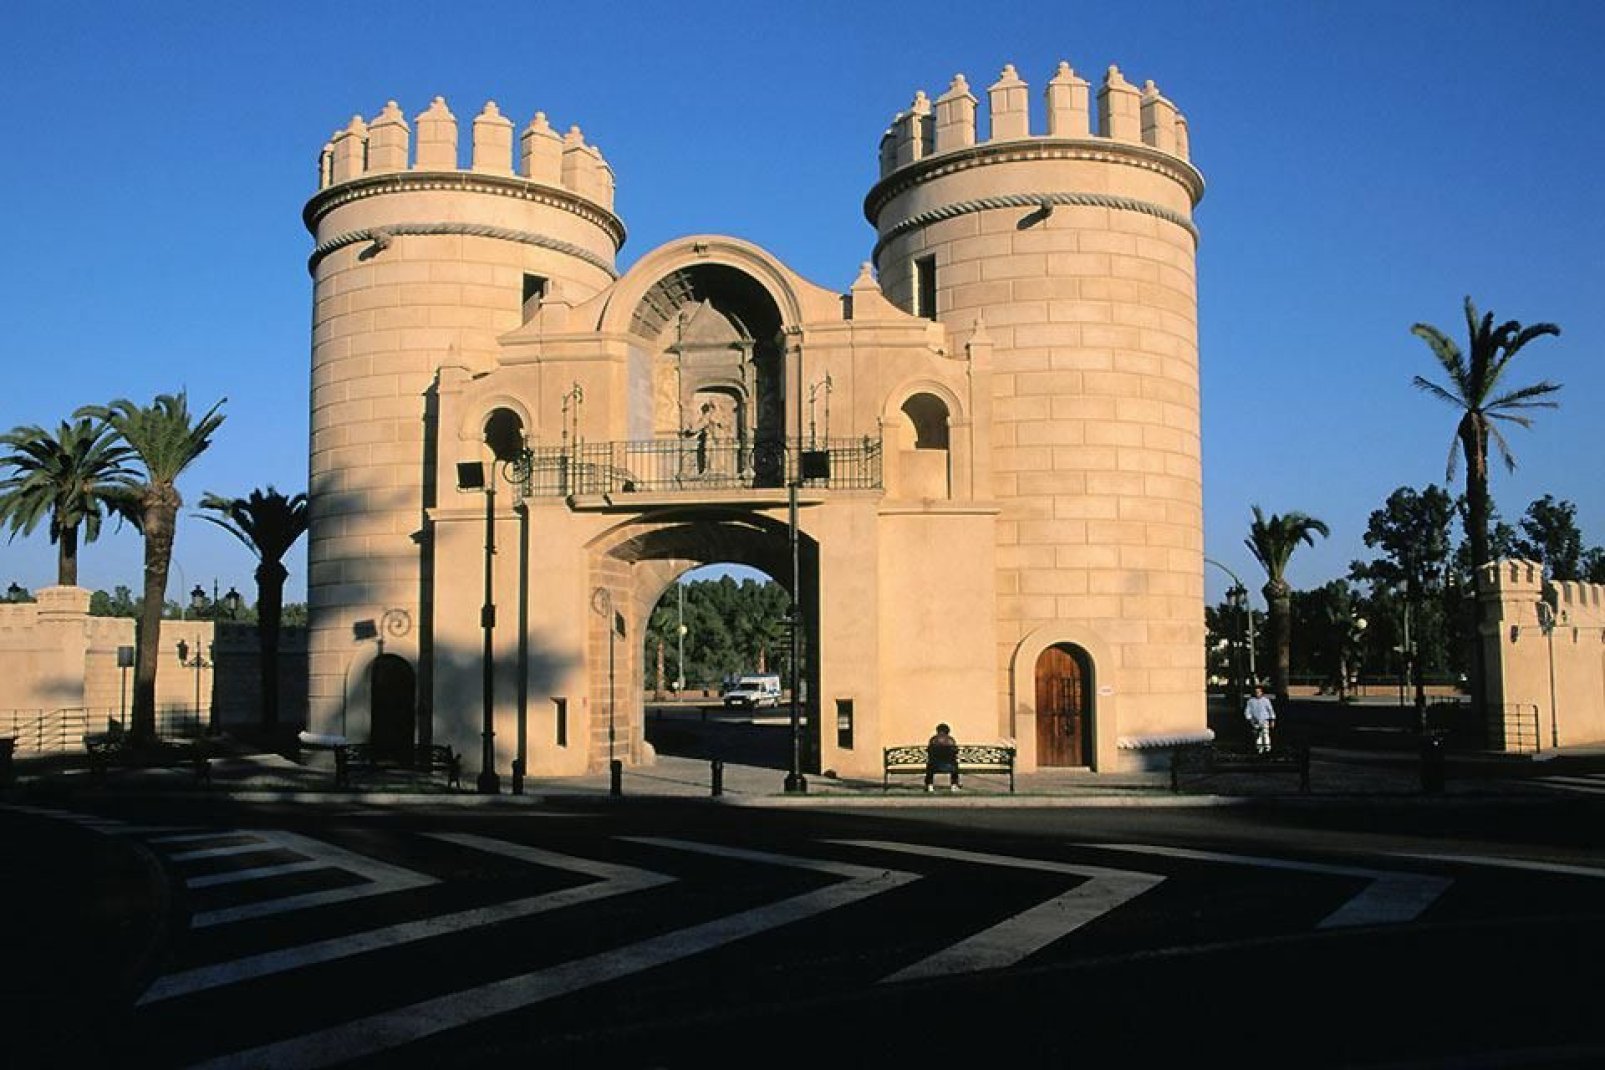 The Alcazar, a monument dating from the 15th century, overlooks the town of Zafra, nicknamed 'Little Seville'.